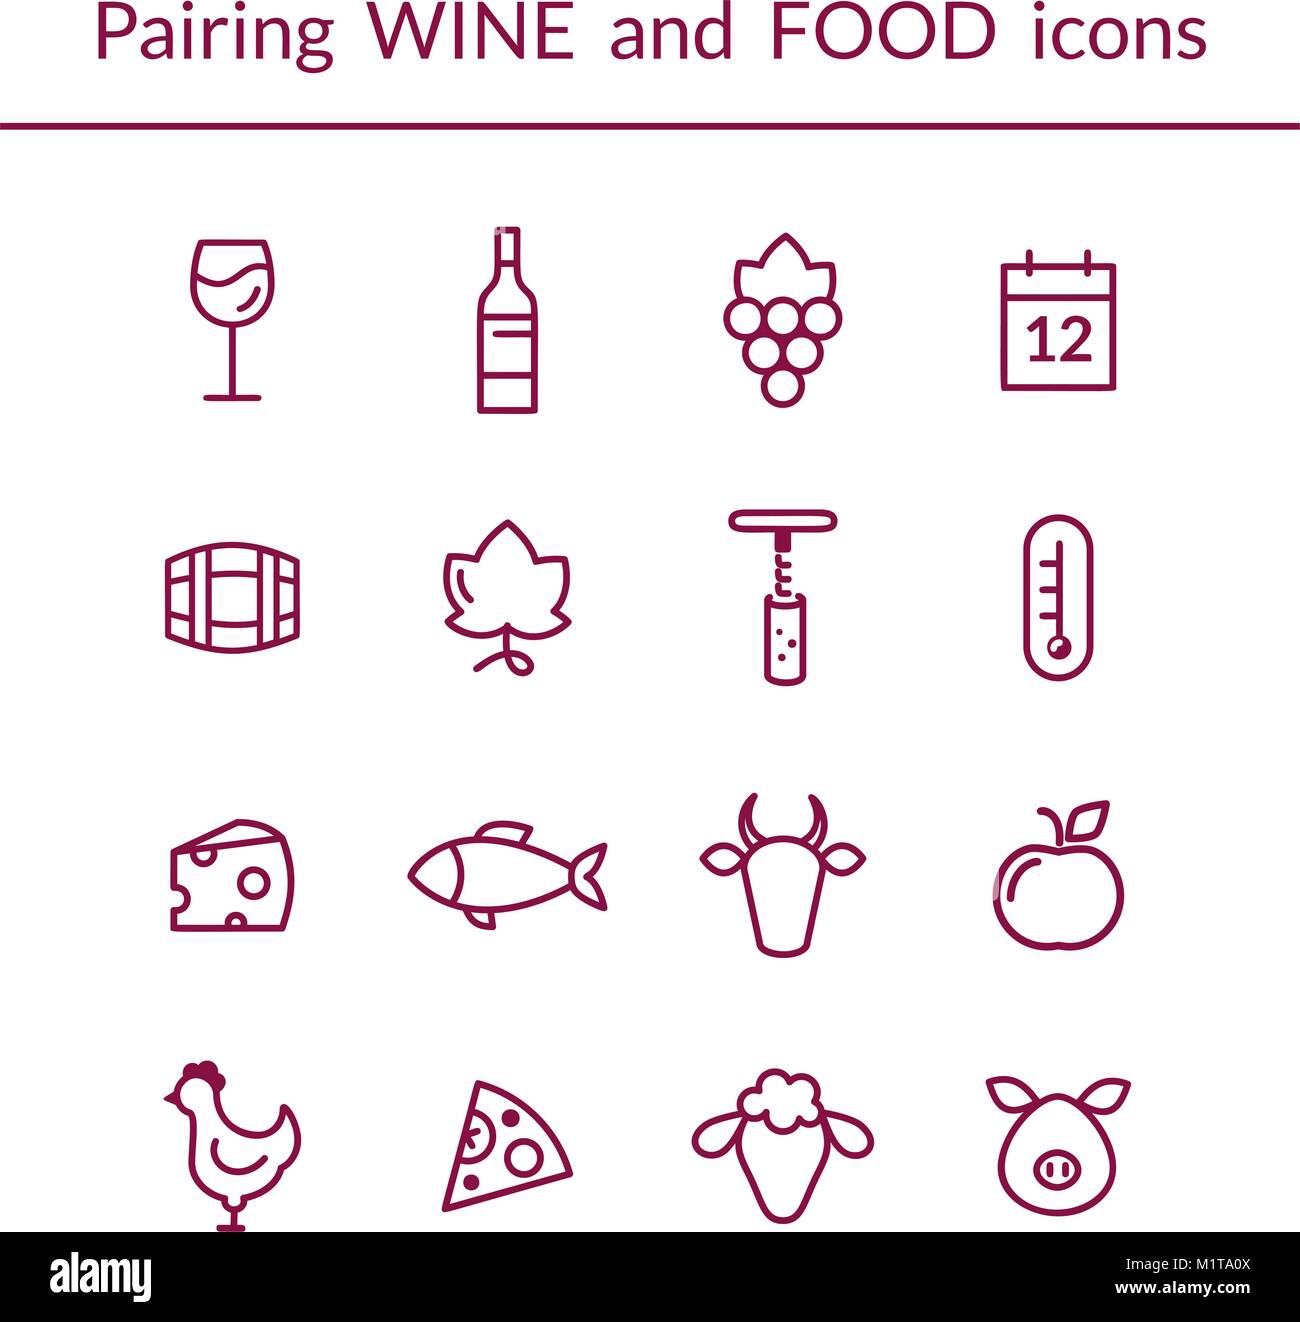 Vector set of line icons for wine and food pairing, such as cheese, fish,  fruits, bottle, glass, grapes. Modern outlined style Stock Vector